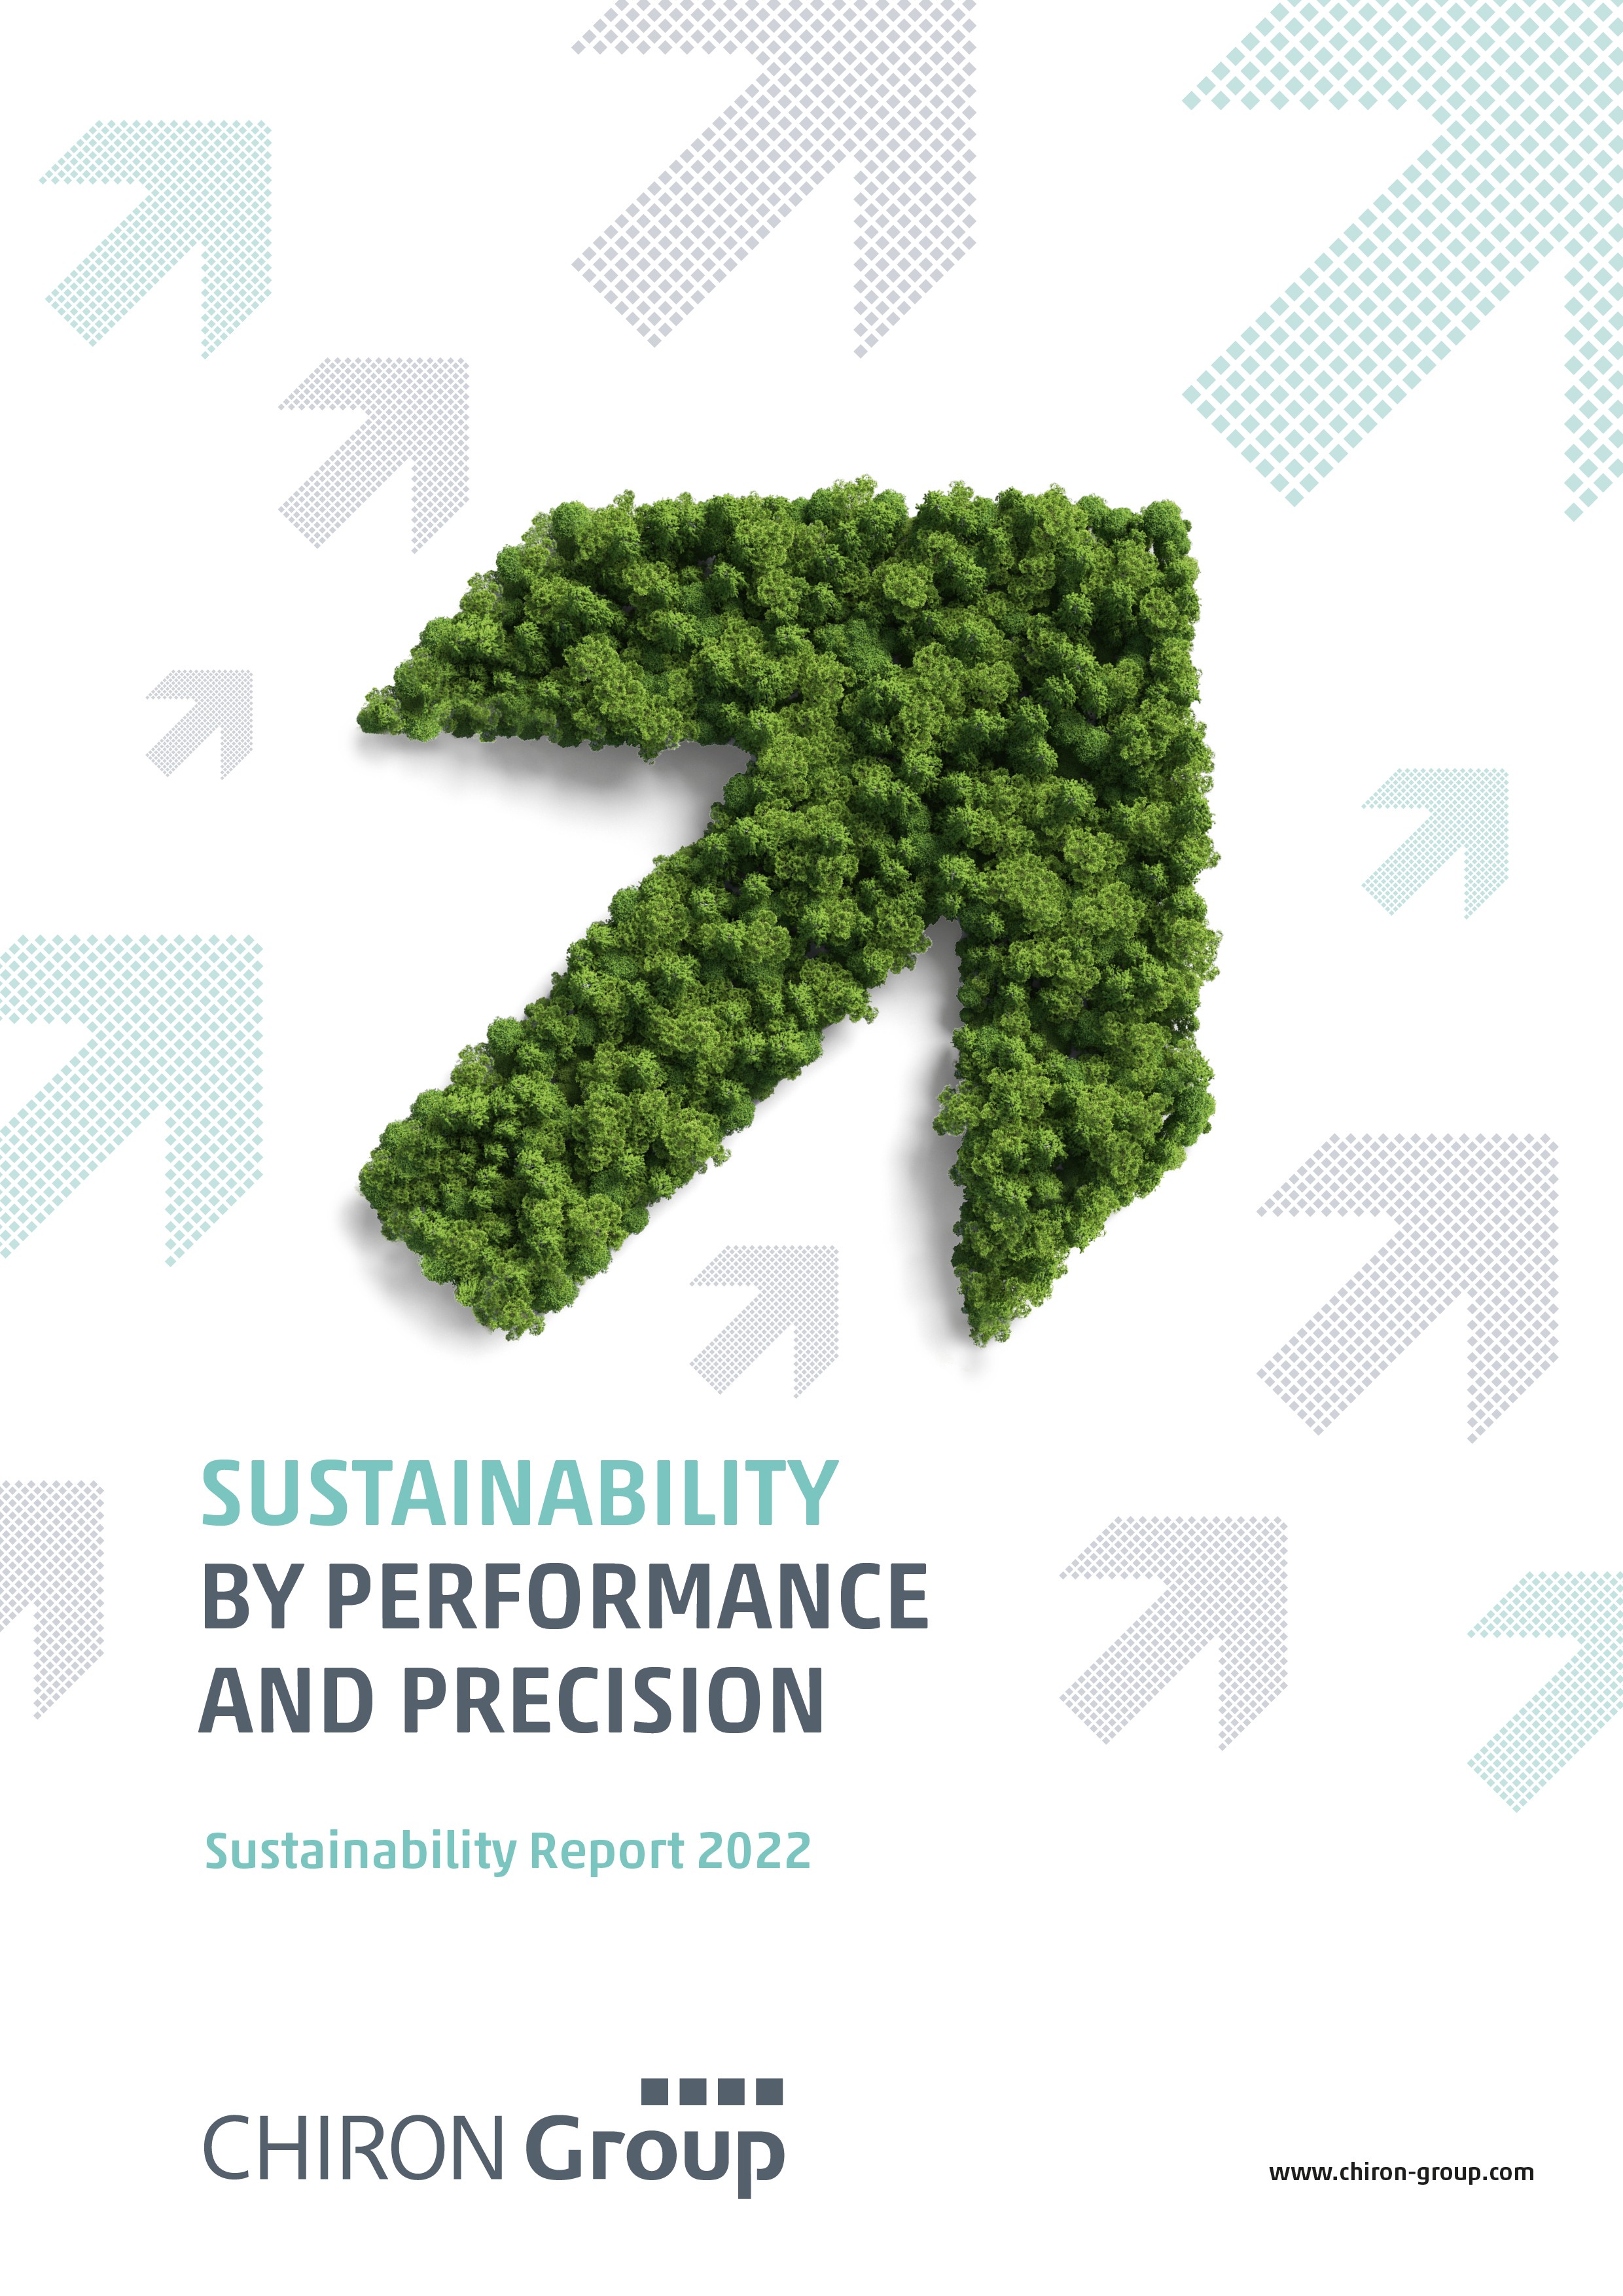 The ascending arrows in the title of the Sustainability Report of the CHIRON Group already indicate the ambitious goals the company is pursuing.